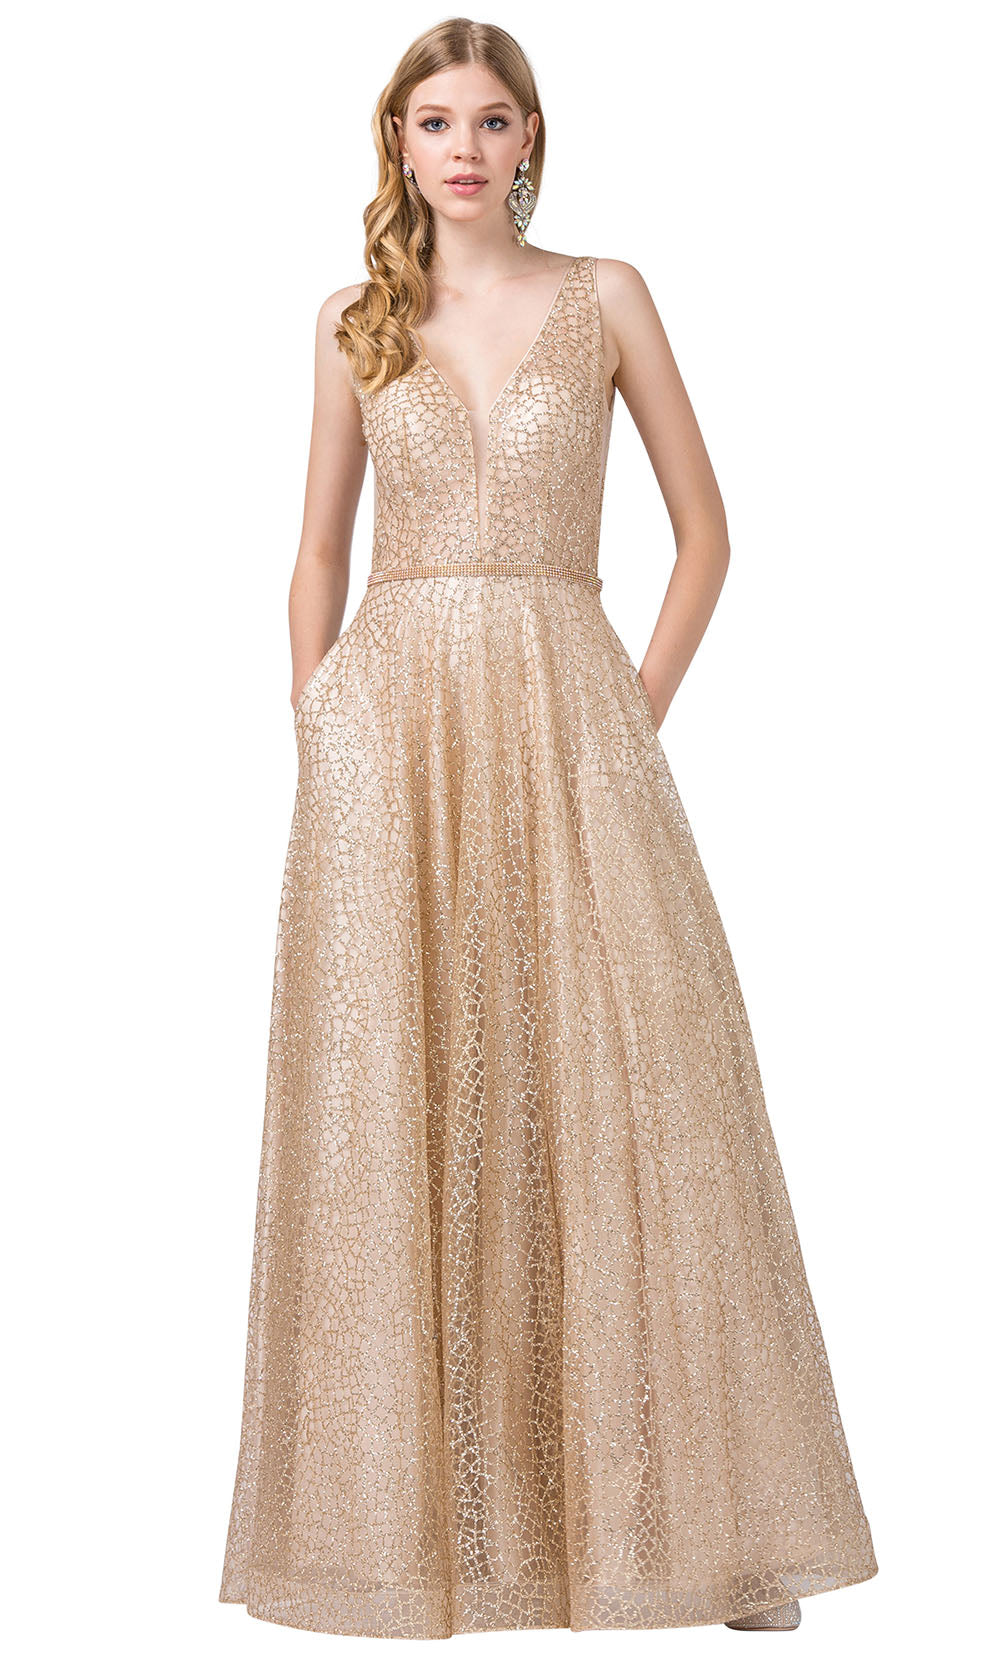 Dancing Queen - 2593 Illusion Bodice Glitter Mesh A-Line Gown In Champagne & Gold